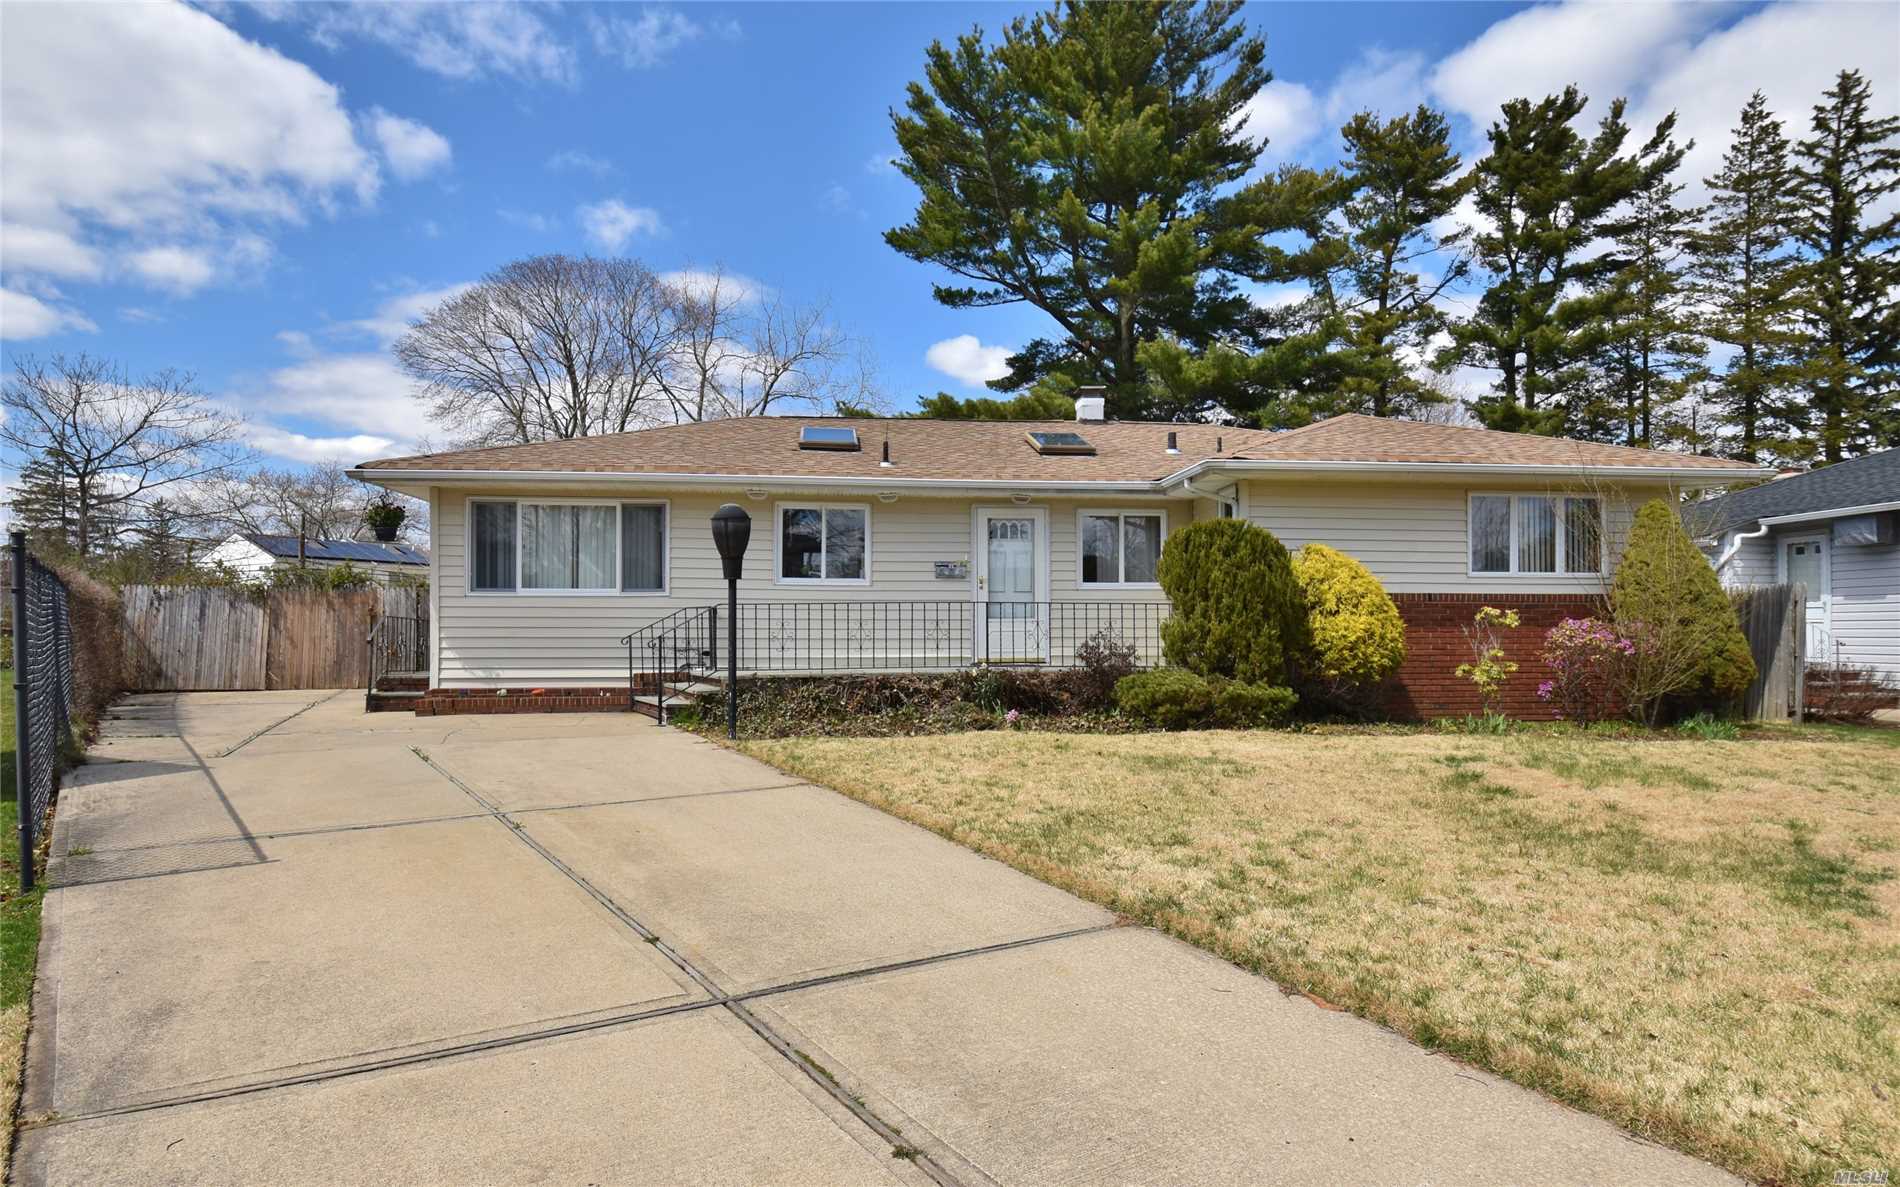 Absolutely Magnicent Ranch Style House On A Dead End Cul De Sac. Great Location. No Car Through Traffic. Close Proximity To Great Shopping, Worship, Long Island Expressway, Northern St Parkway, Seaford Oyster Bay Expressway. 10 Minutes To Lirr This House Has Great Sunlight. Offers An Oversized Backyard. It Also Offers A Legal Mother Daughter Apartment. Bring Mom And Dad,  Low Taxes, Less Then 11, 000 With Star Without Mother Daughter. Award Winning Plainview Old Bethpage Schools.